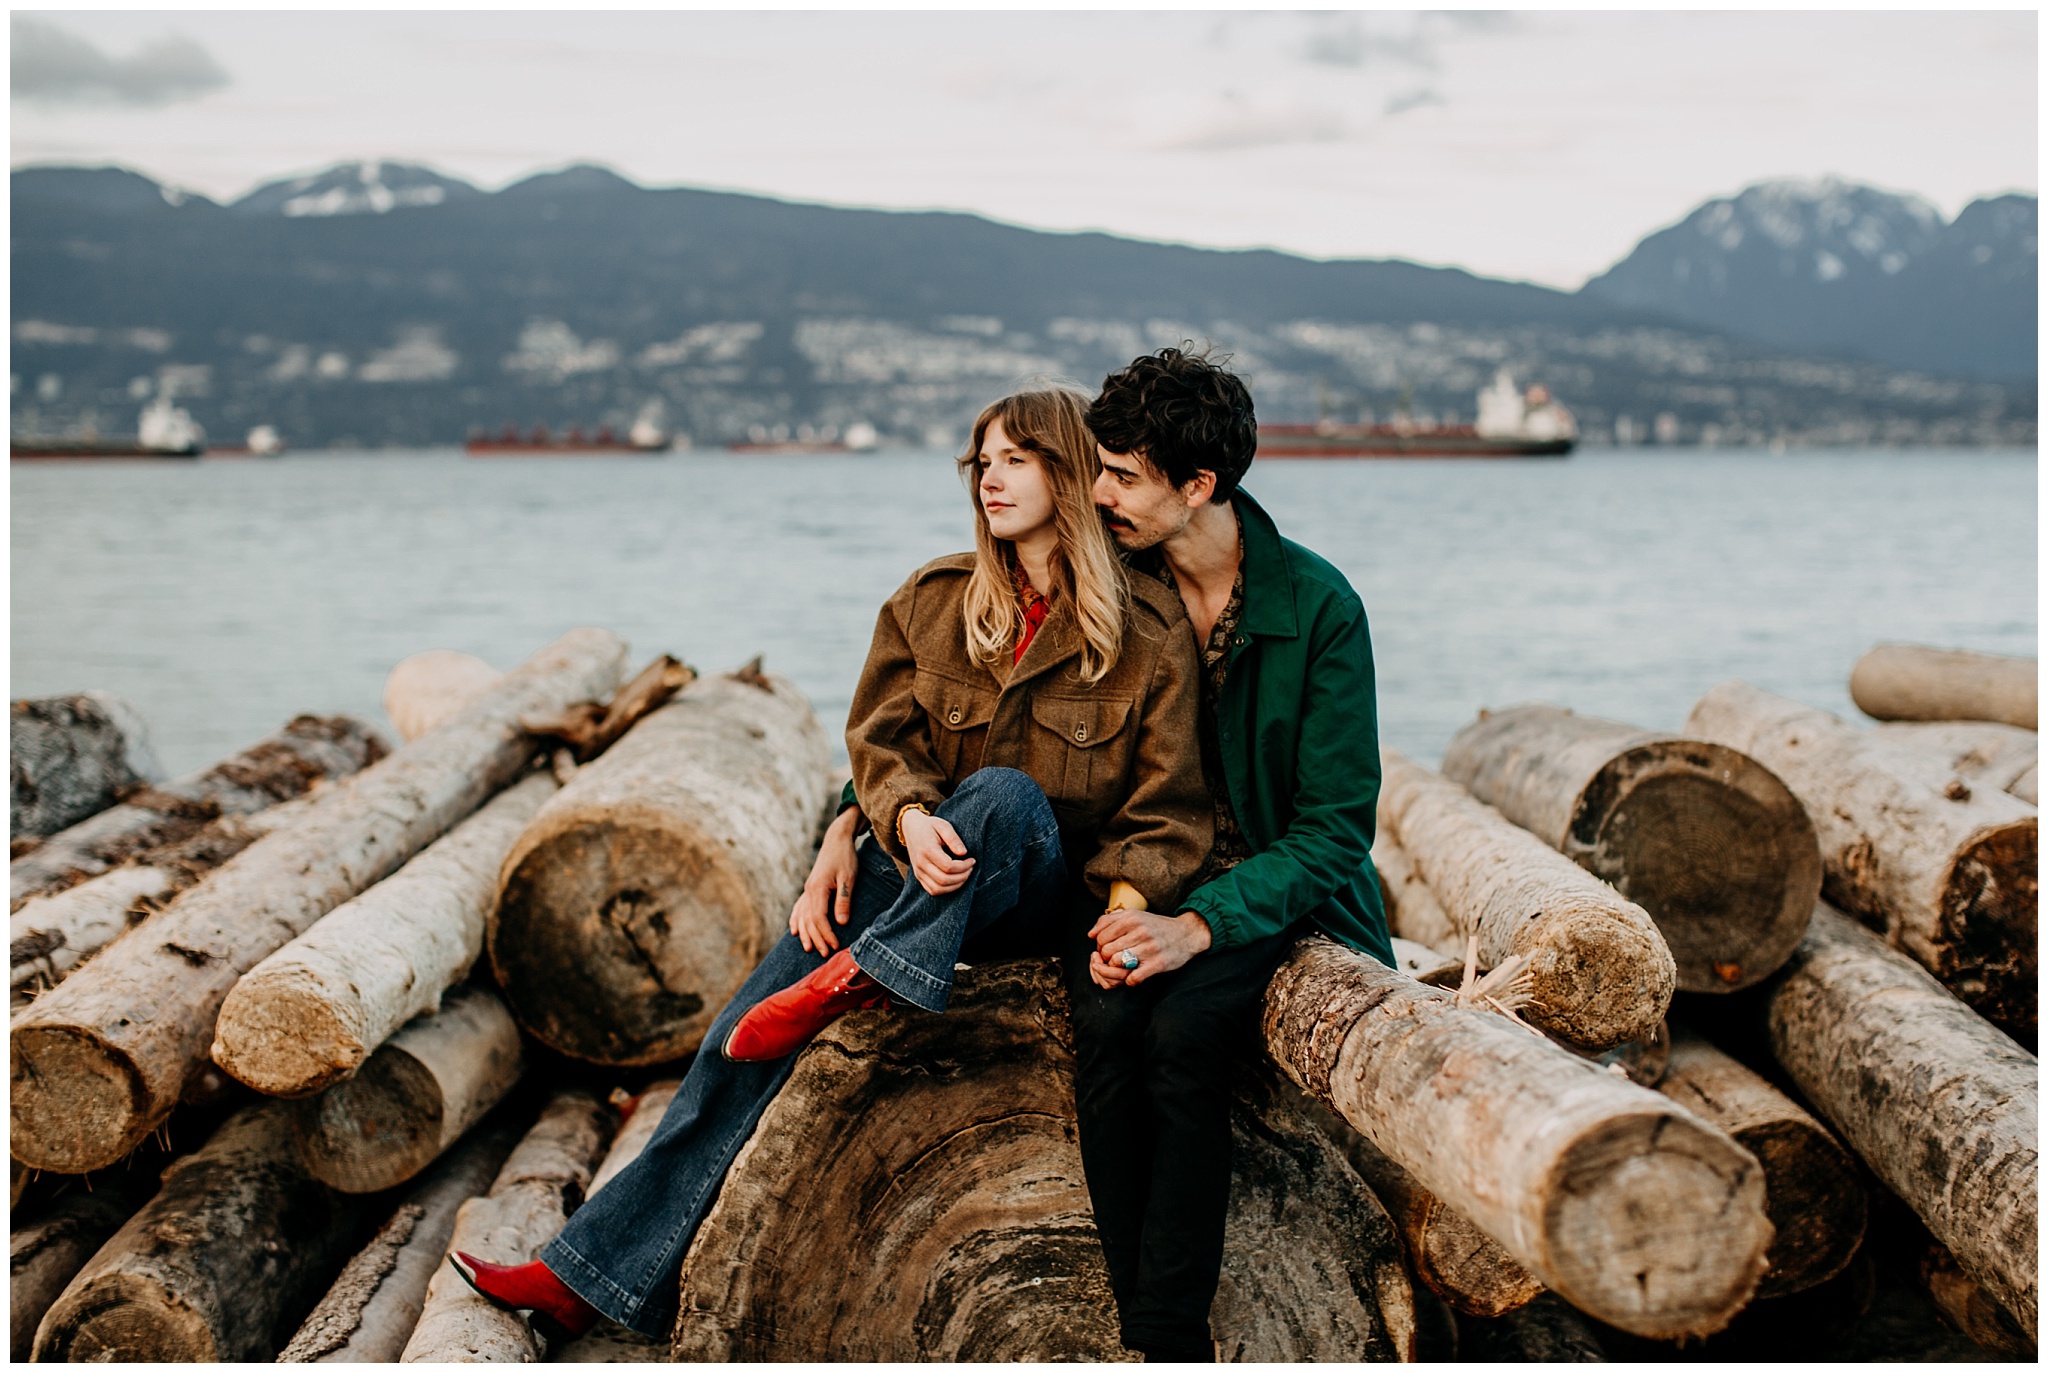 70s inspired couples outfit at jericho beach engagement session